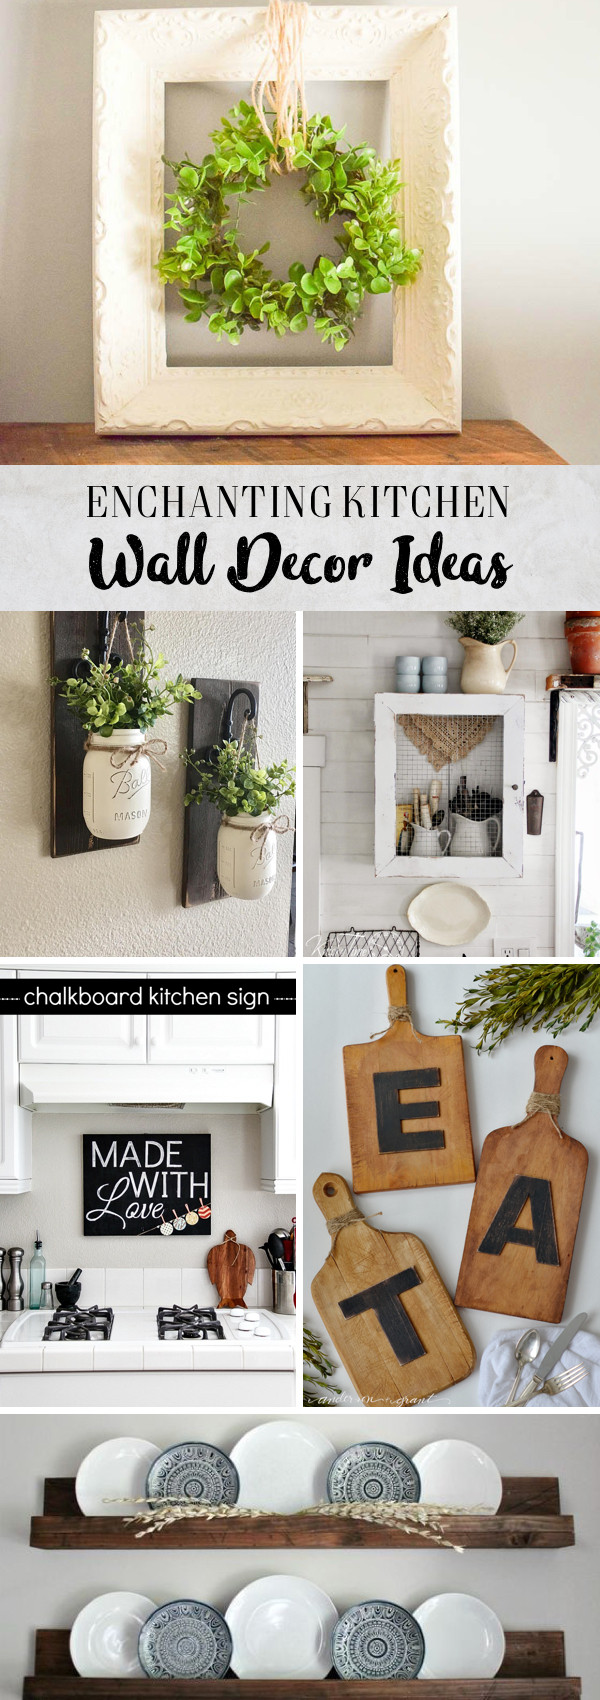 Kitchen Wall Art Ideas
 30 Enchanting Kitchen Wall Decor Ideas That are Oozing